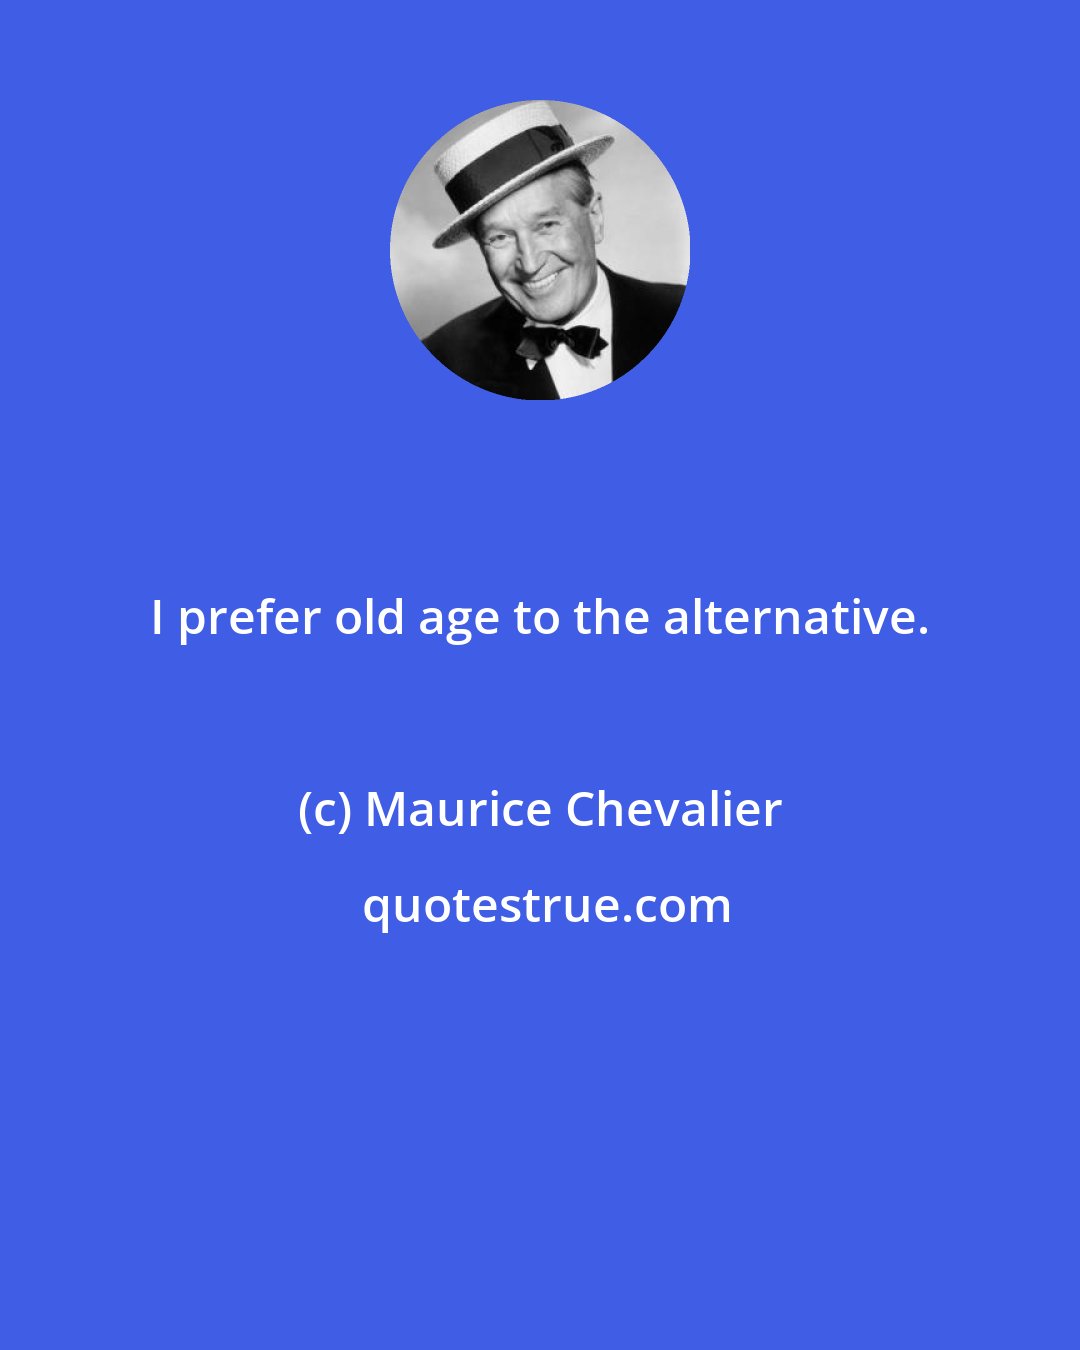 Maurice Chevalier: I prefer old age to the alternative.